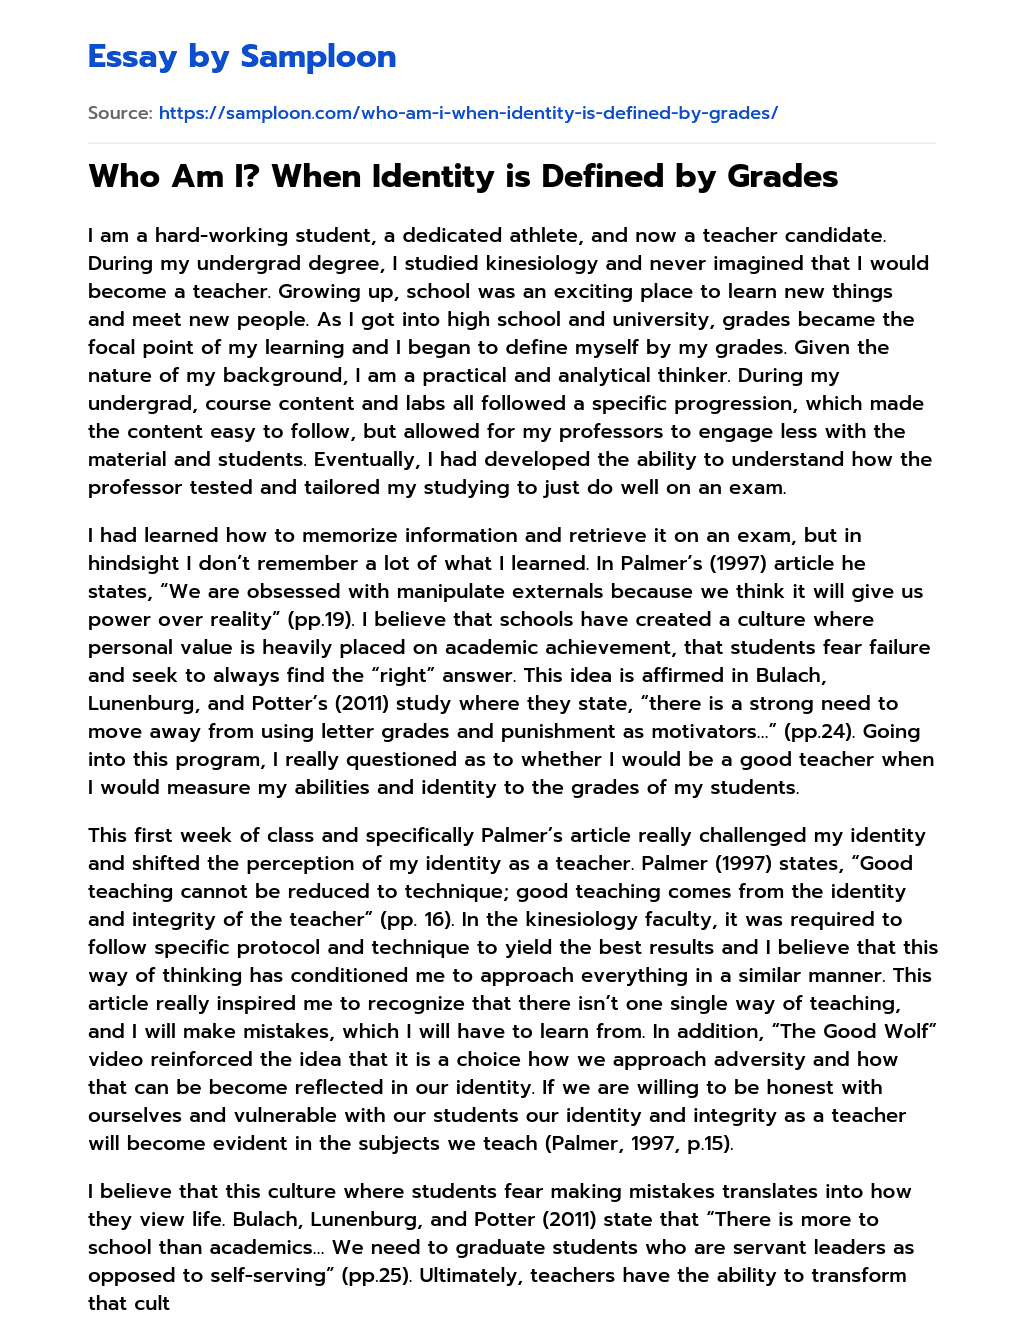 Who Am I? When Identity is Defined by Grades essay